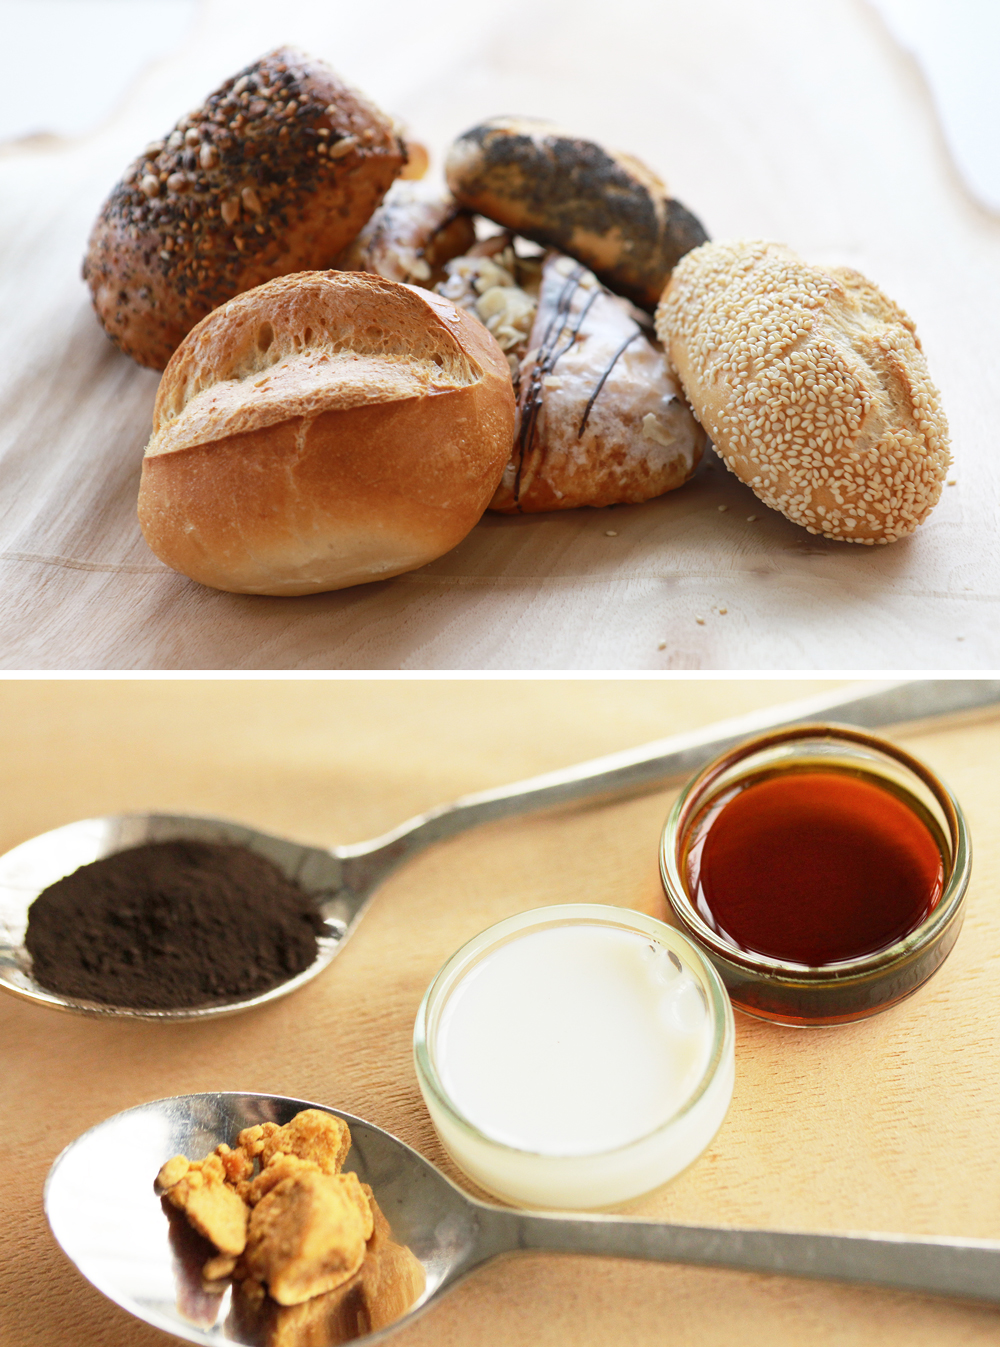 The left section of the image shows a pile of old bakery products. To the right of this are a spoon with a dark brown powder, a spoon with pale brown lumps, a small glass bowl with brown liquid and a small glass bowl with white liquid. 